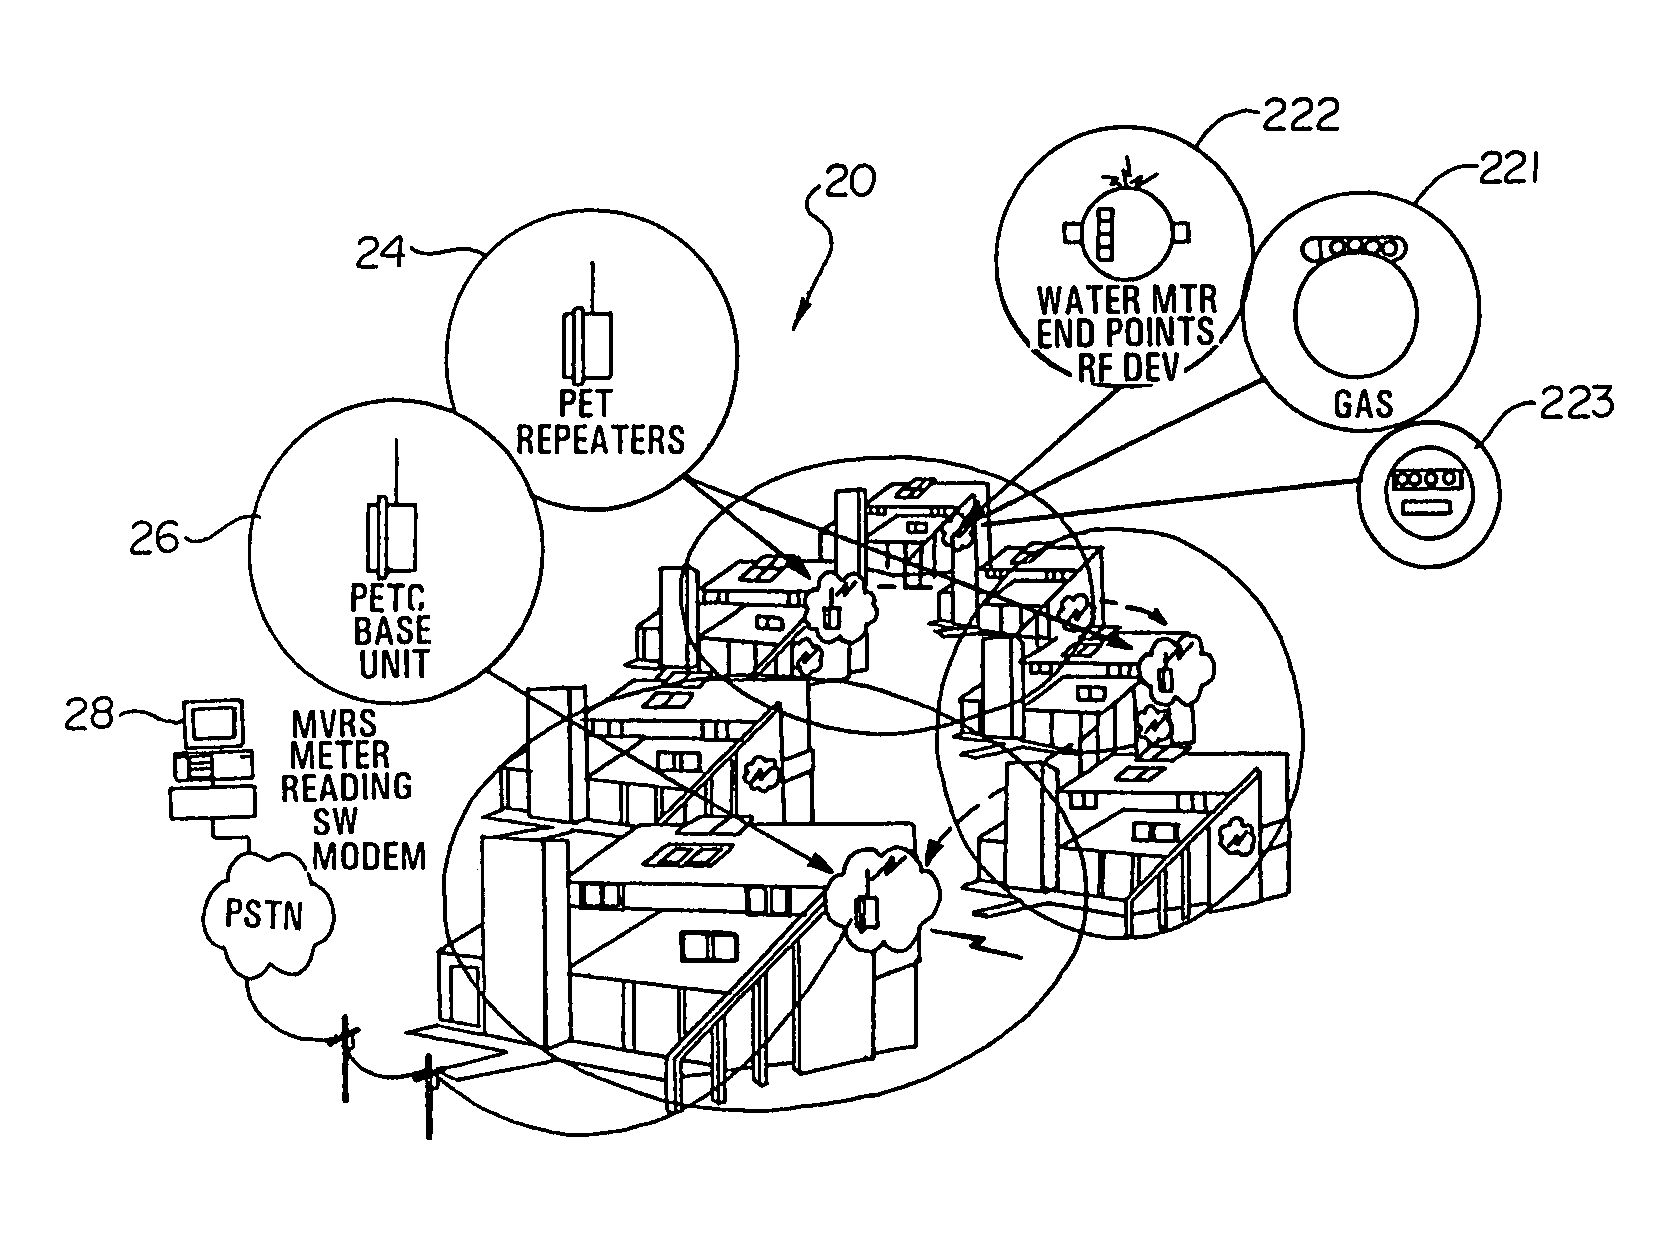 Spread spectrum meter reading system utilizing low-speed/high-power frequency hopping